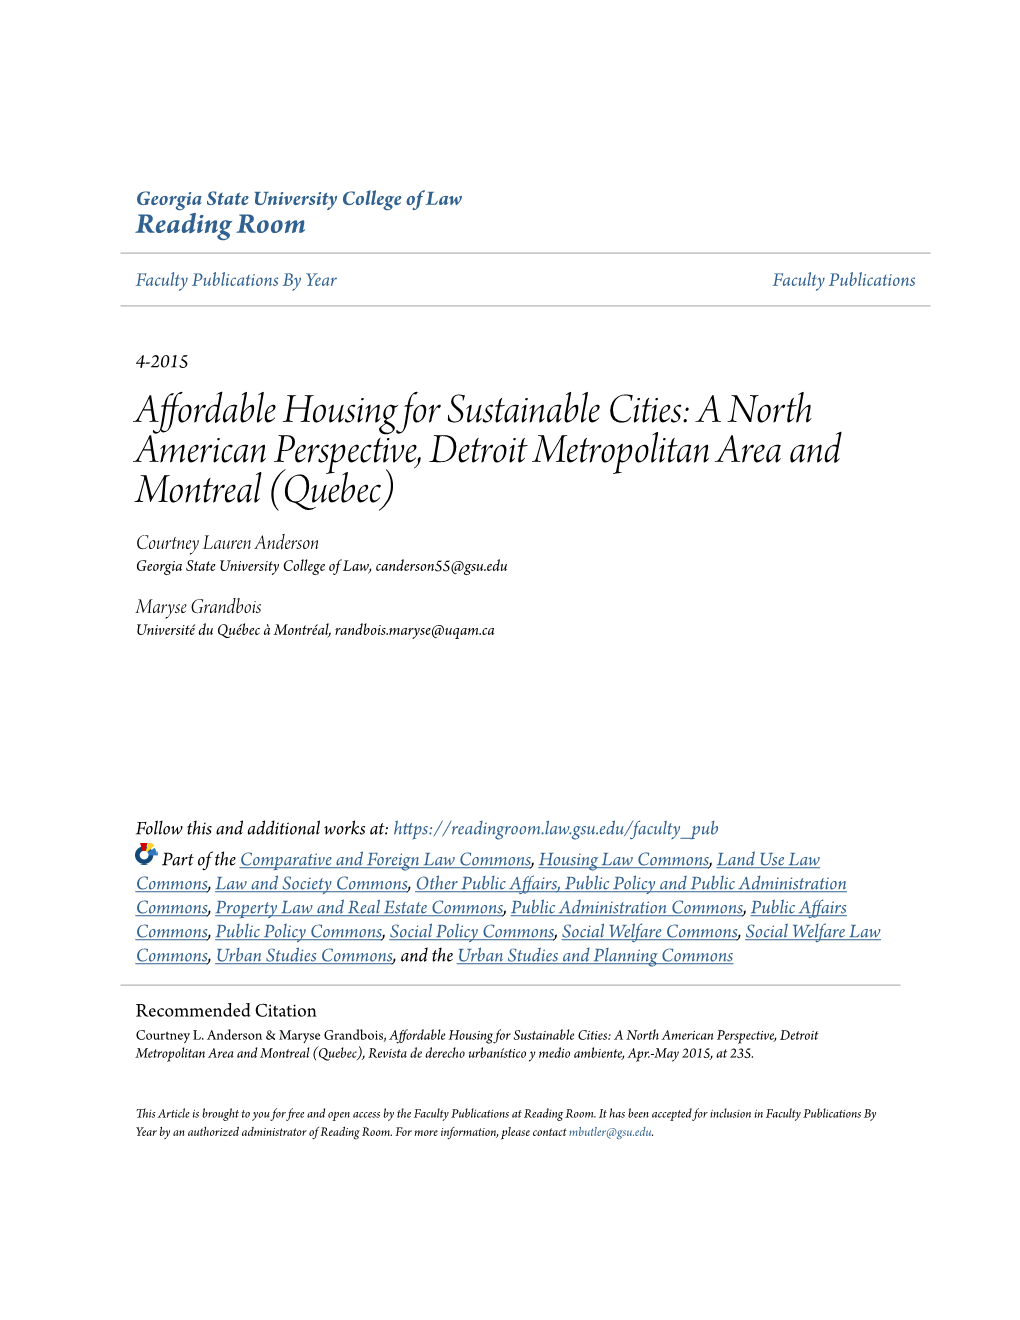 Affordable Housing for Sustainable Cities